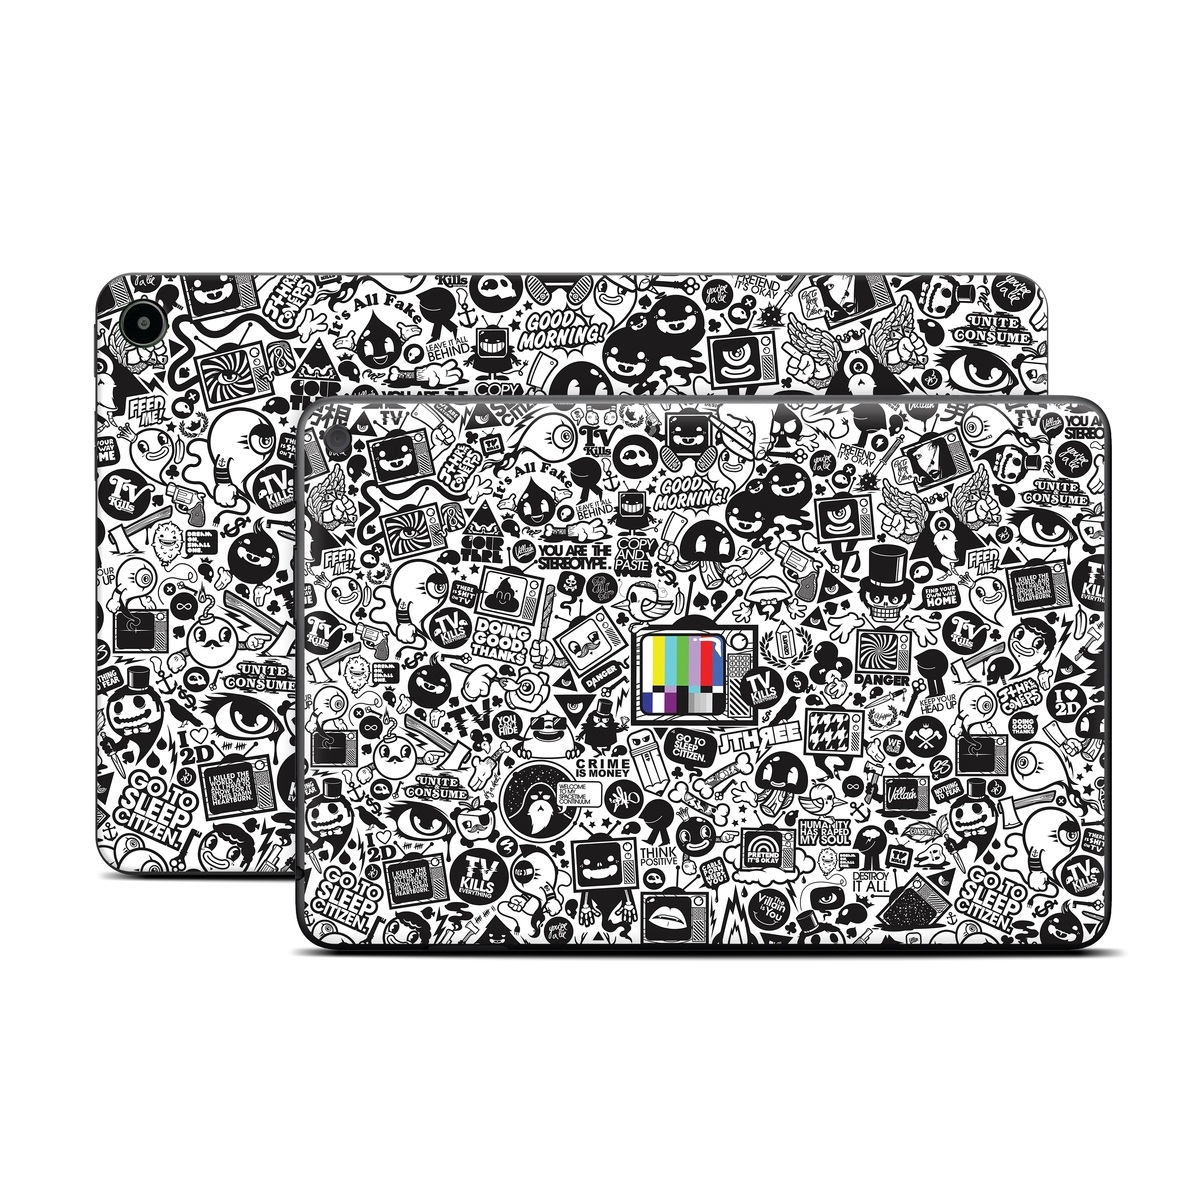 Amazon Fire Tablet Series Skin Skin design of Pattern, Drawing, Doodle, Design, Visual arts, Font, Black-and-white, Monochrome, Illustration, Art, with gray, black, white colors